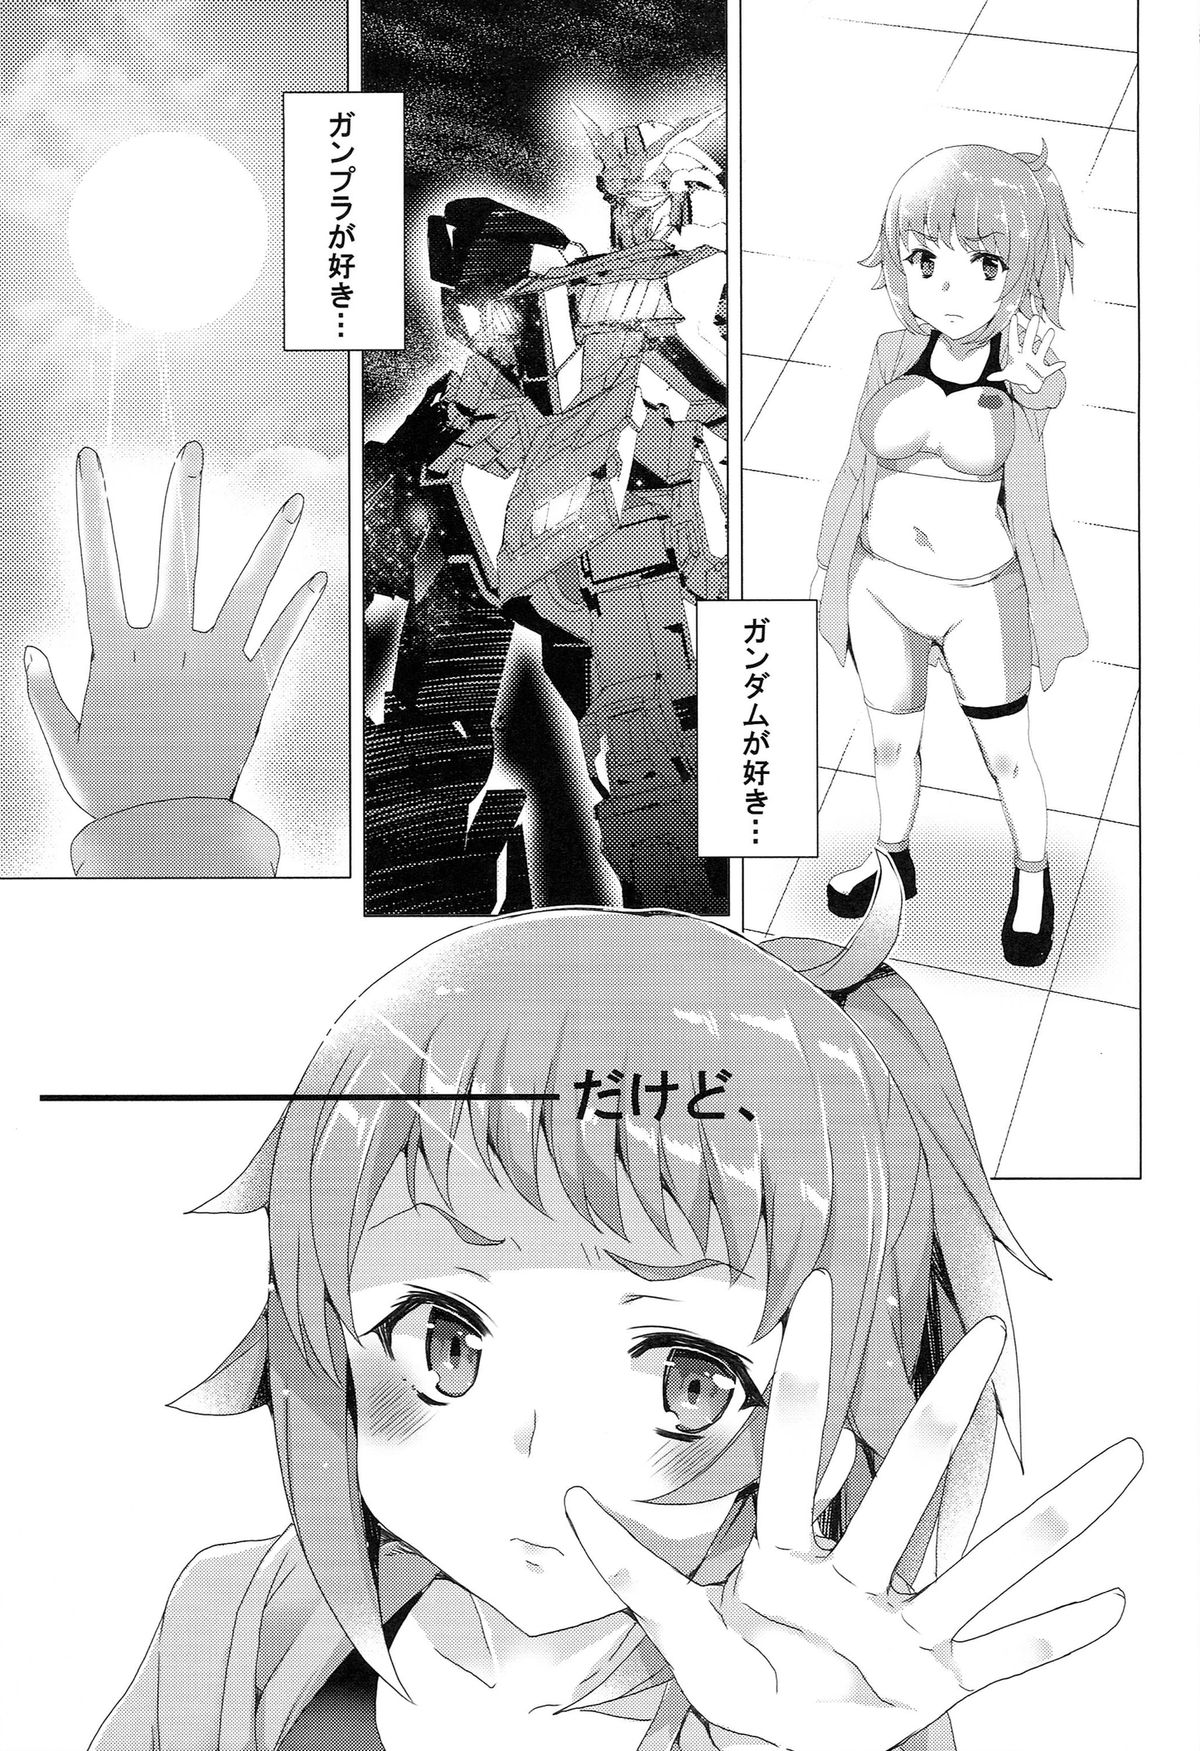 [Waffle Doumeiken (Tanaka Decilitre)] Yariman Bitch Fighters (Gundam Build Fighters Try) page 5 full